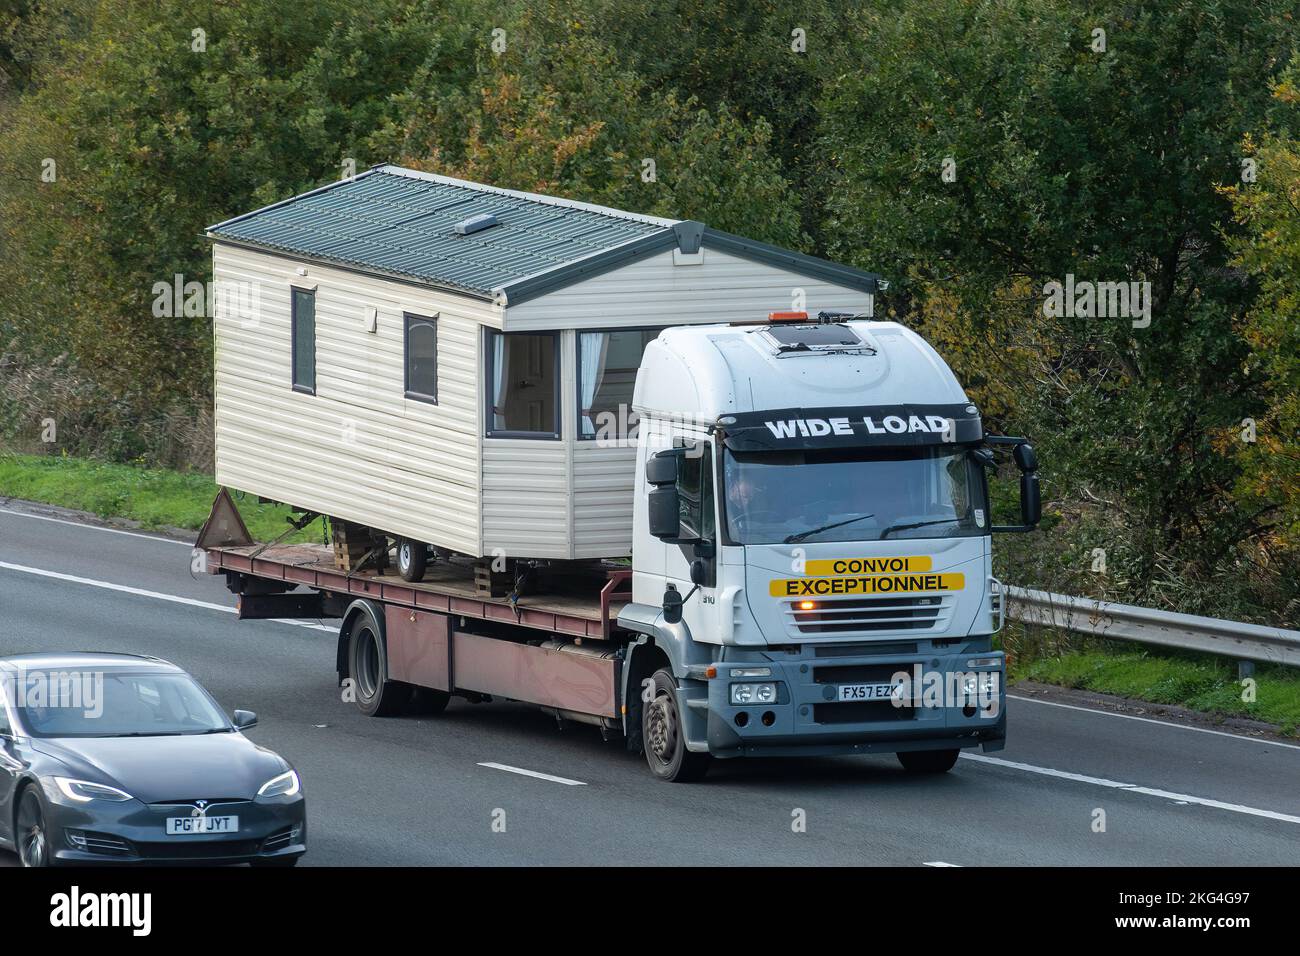 HGV transporting a mobile home along the M3 motorway, wide load, England, UK Stock Photo